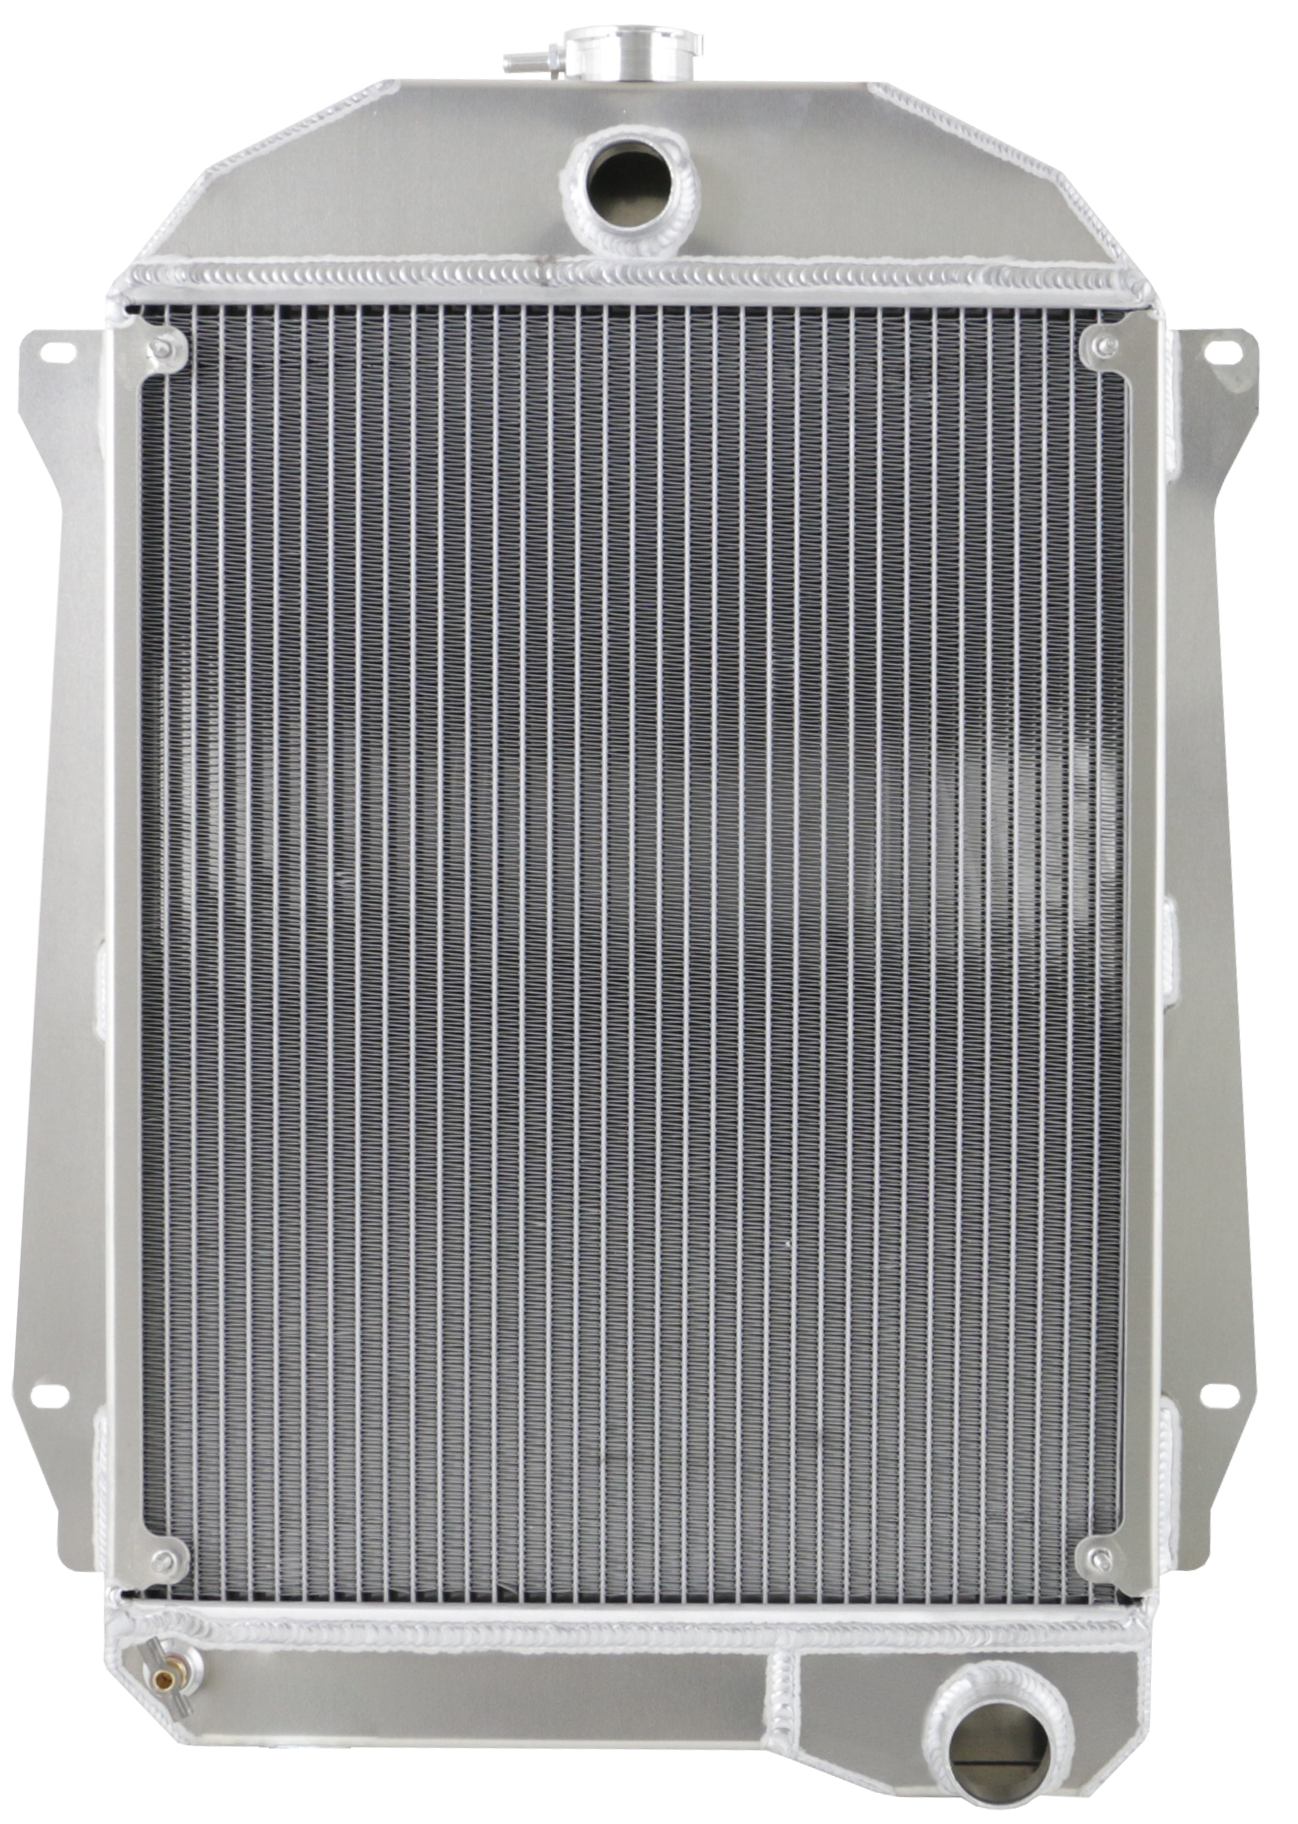 Wizard Cooling Inc - Wizard Cooling - 1940-1941 Chevrolet Street Rod Aluminum Radiator w/ ANGLED BRACKETS - 10506-100